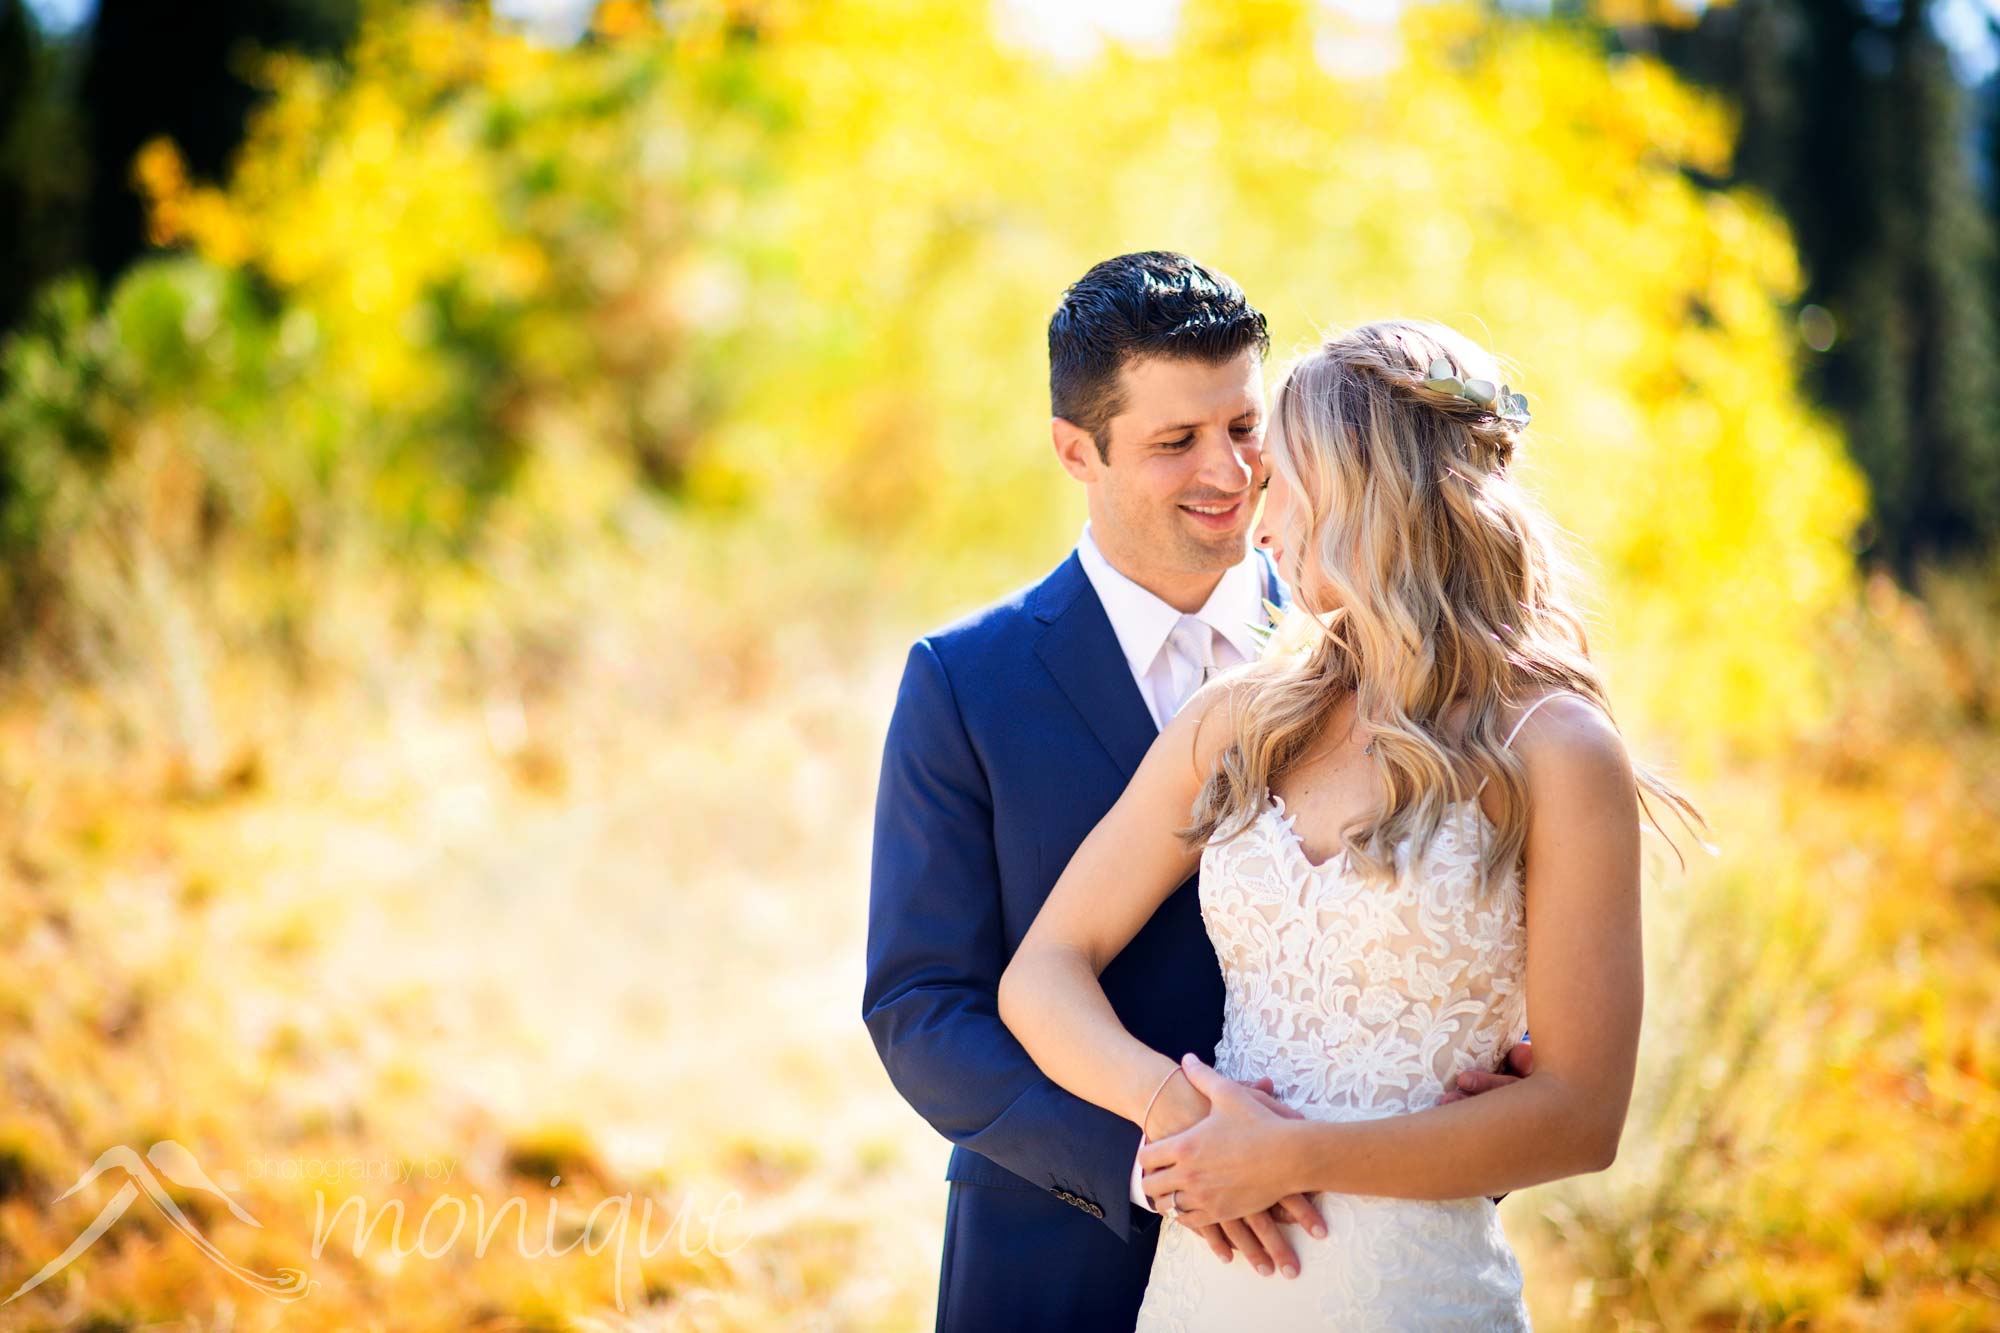 Nakoma Resort wedding photography in the Lost Sierra with yellow aspens and fall colors all around